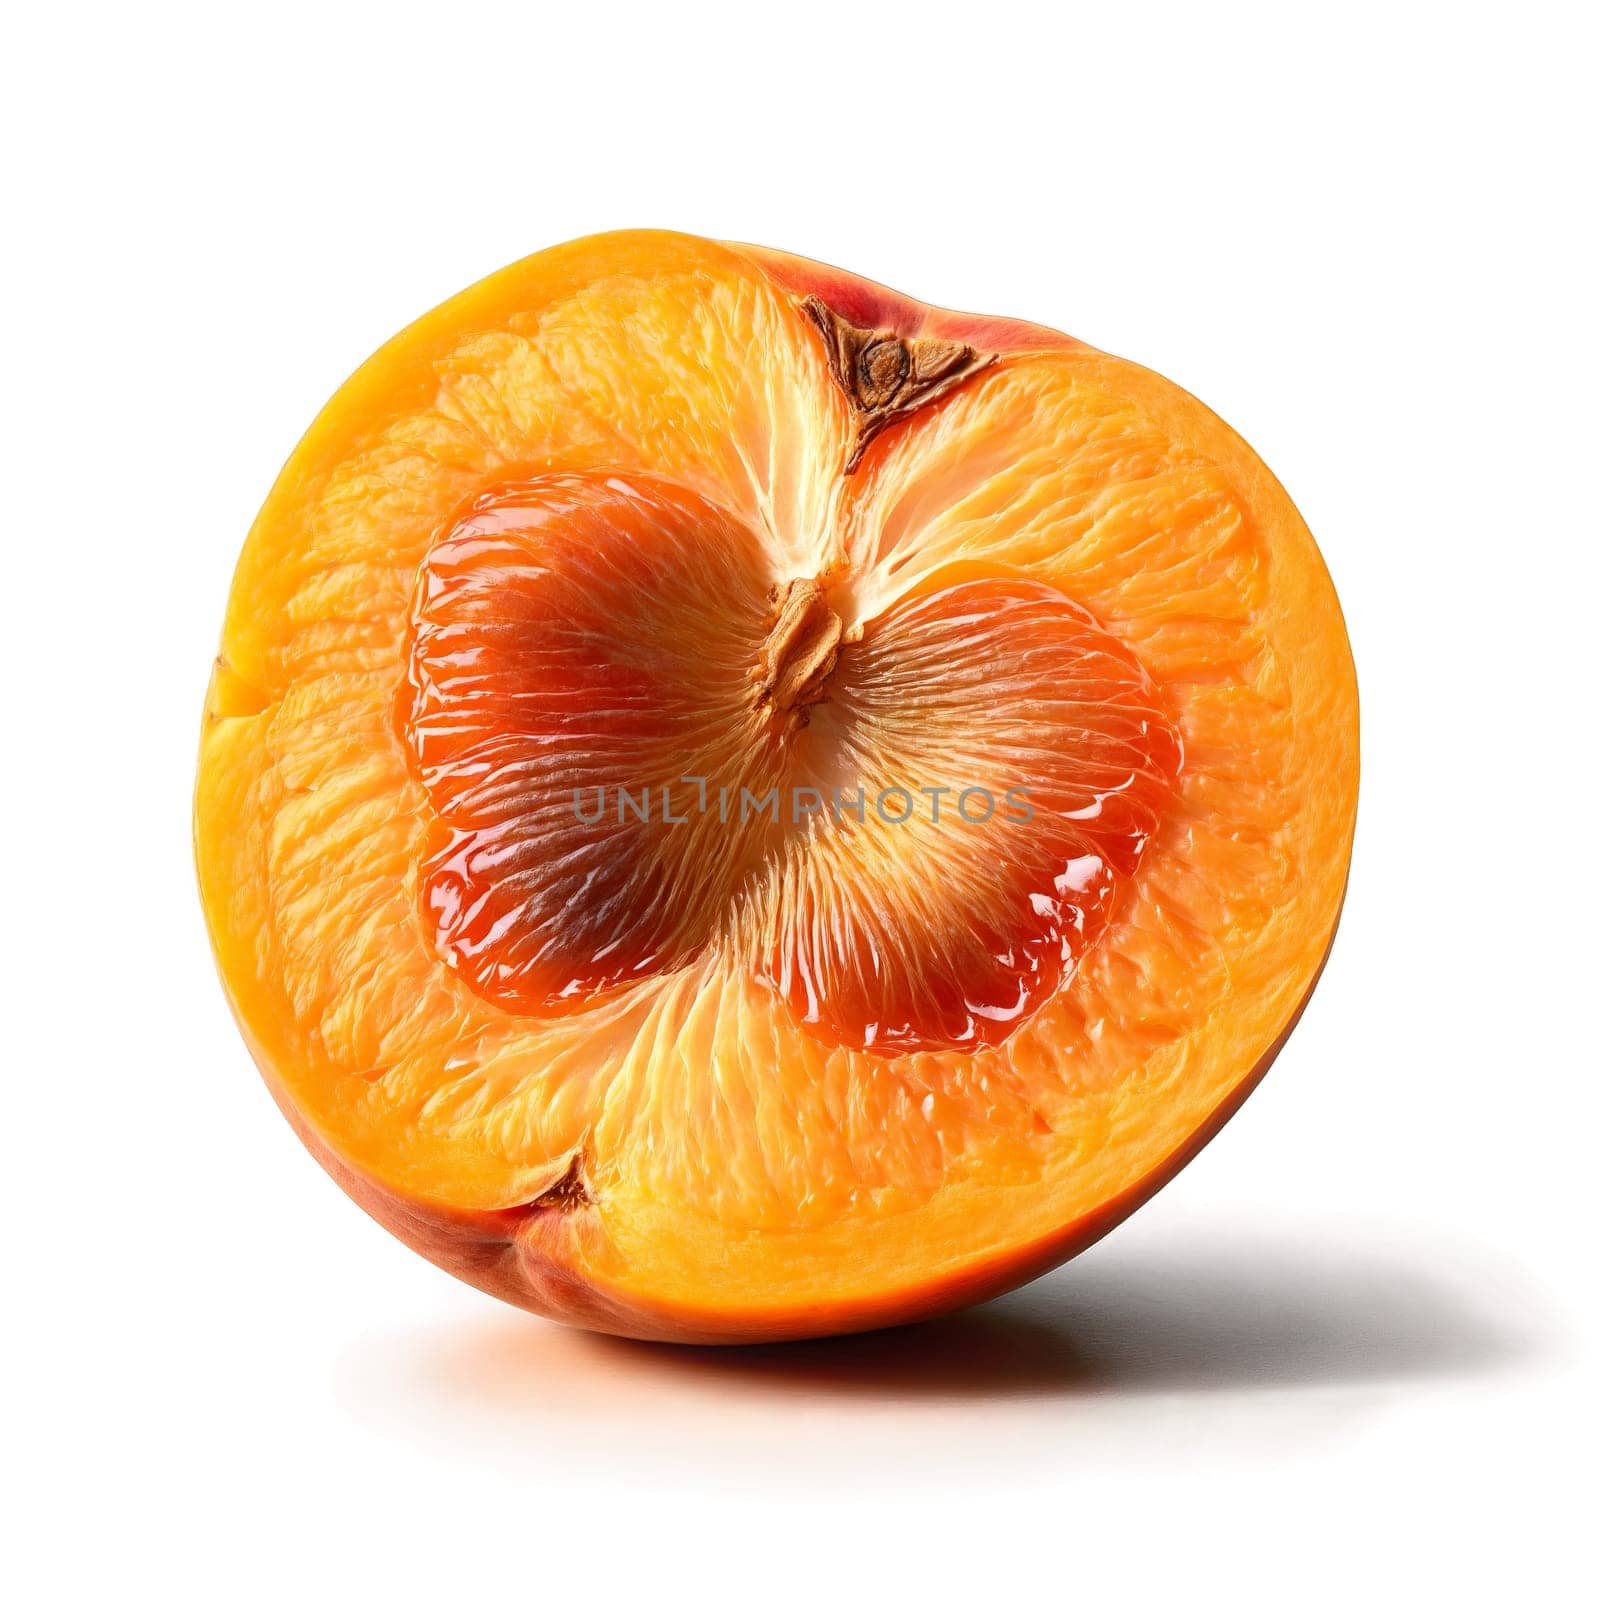 Apricot with sliced half and pit exposed in orange flesh Food and culinary concept by panophotograph